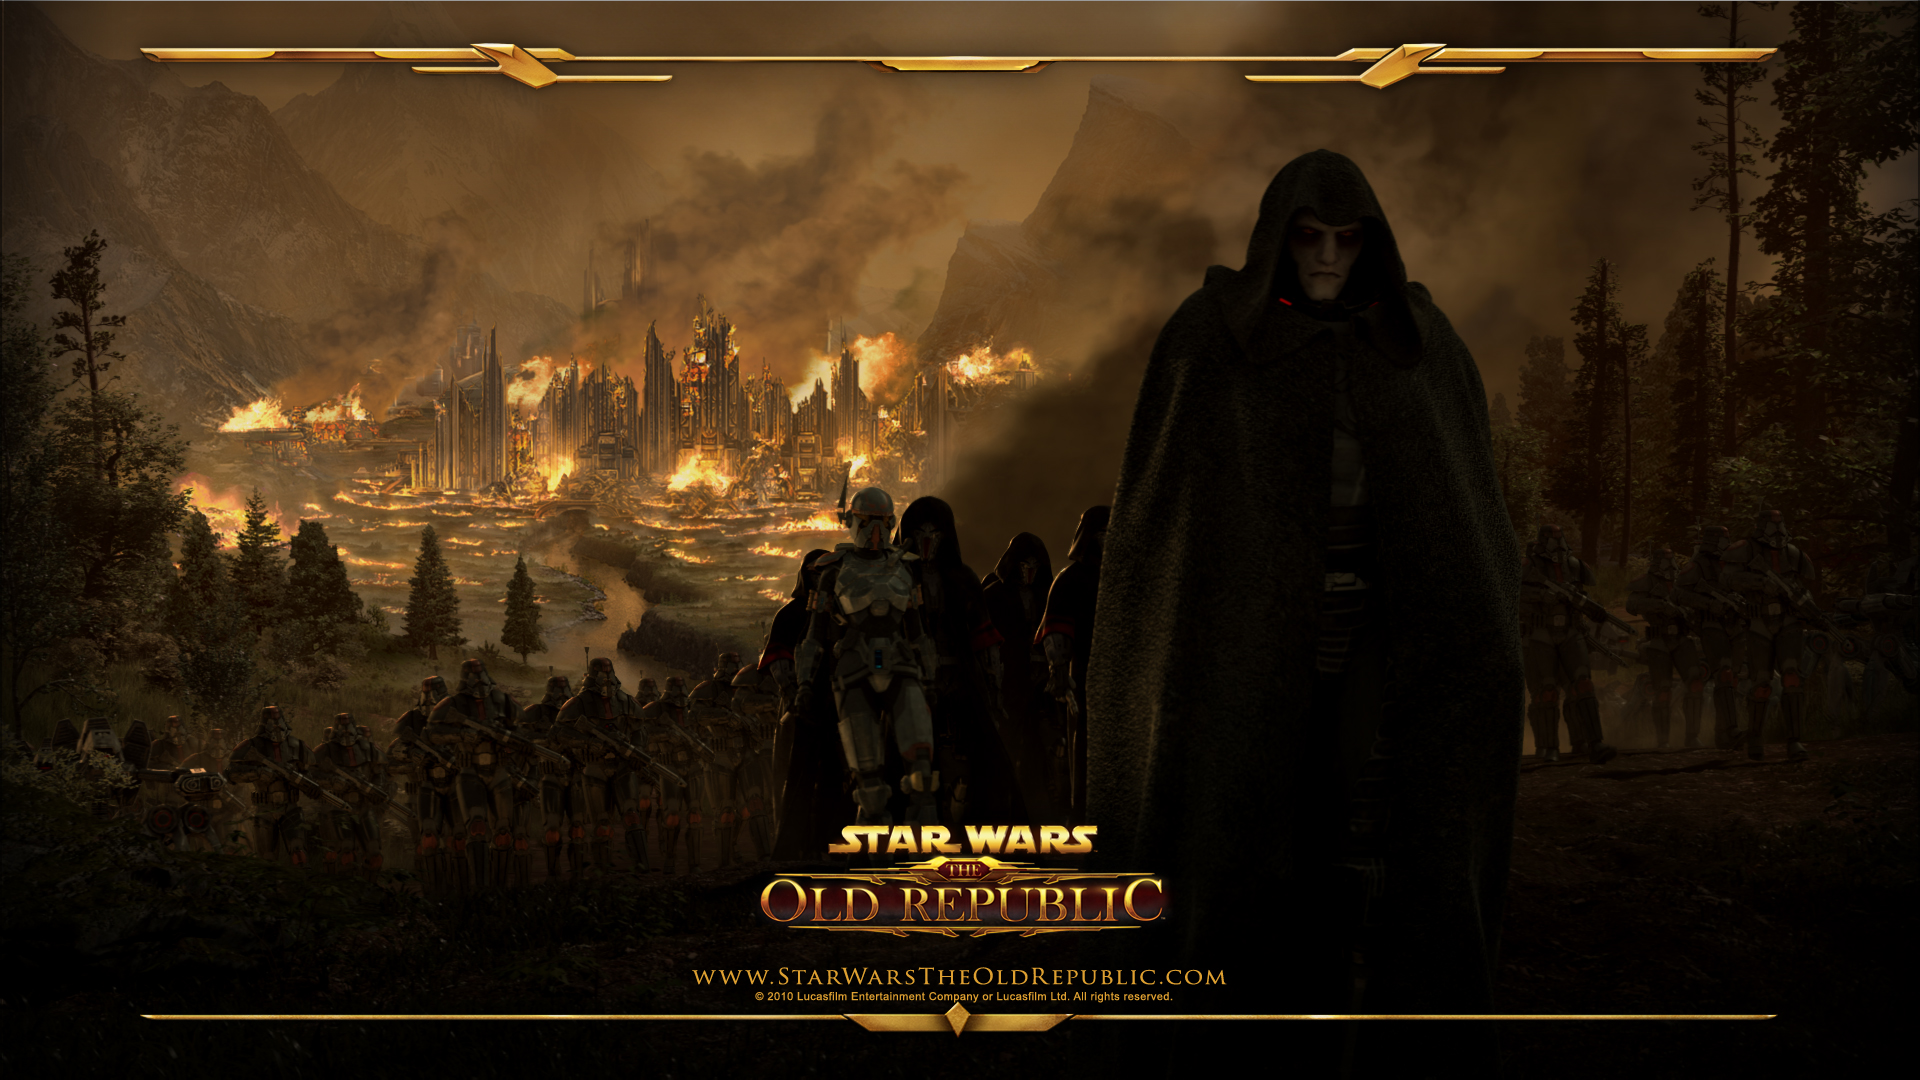 SWTOR Wallpaper Archive - PC Gaming Forum